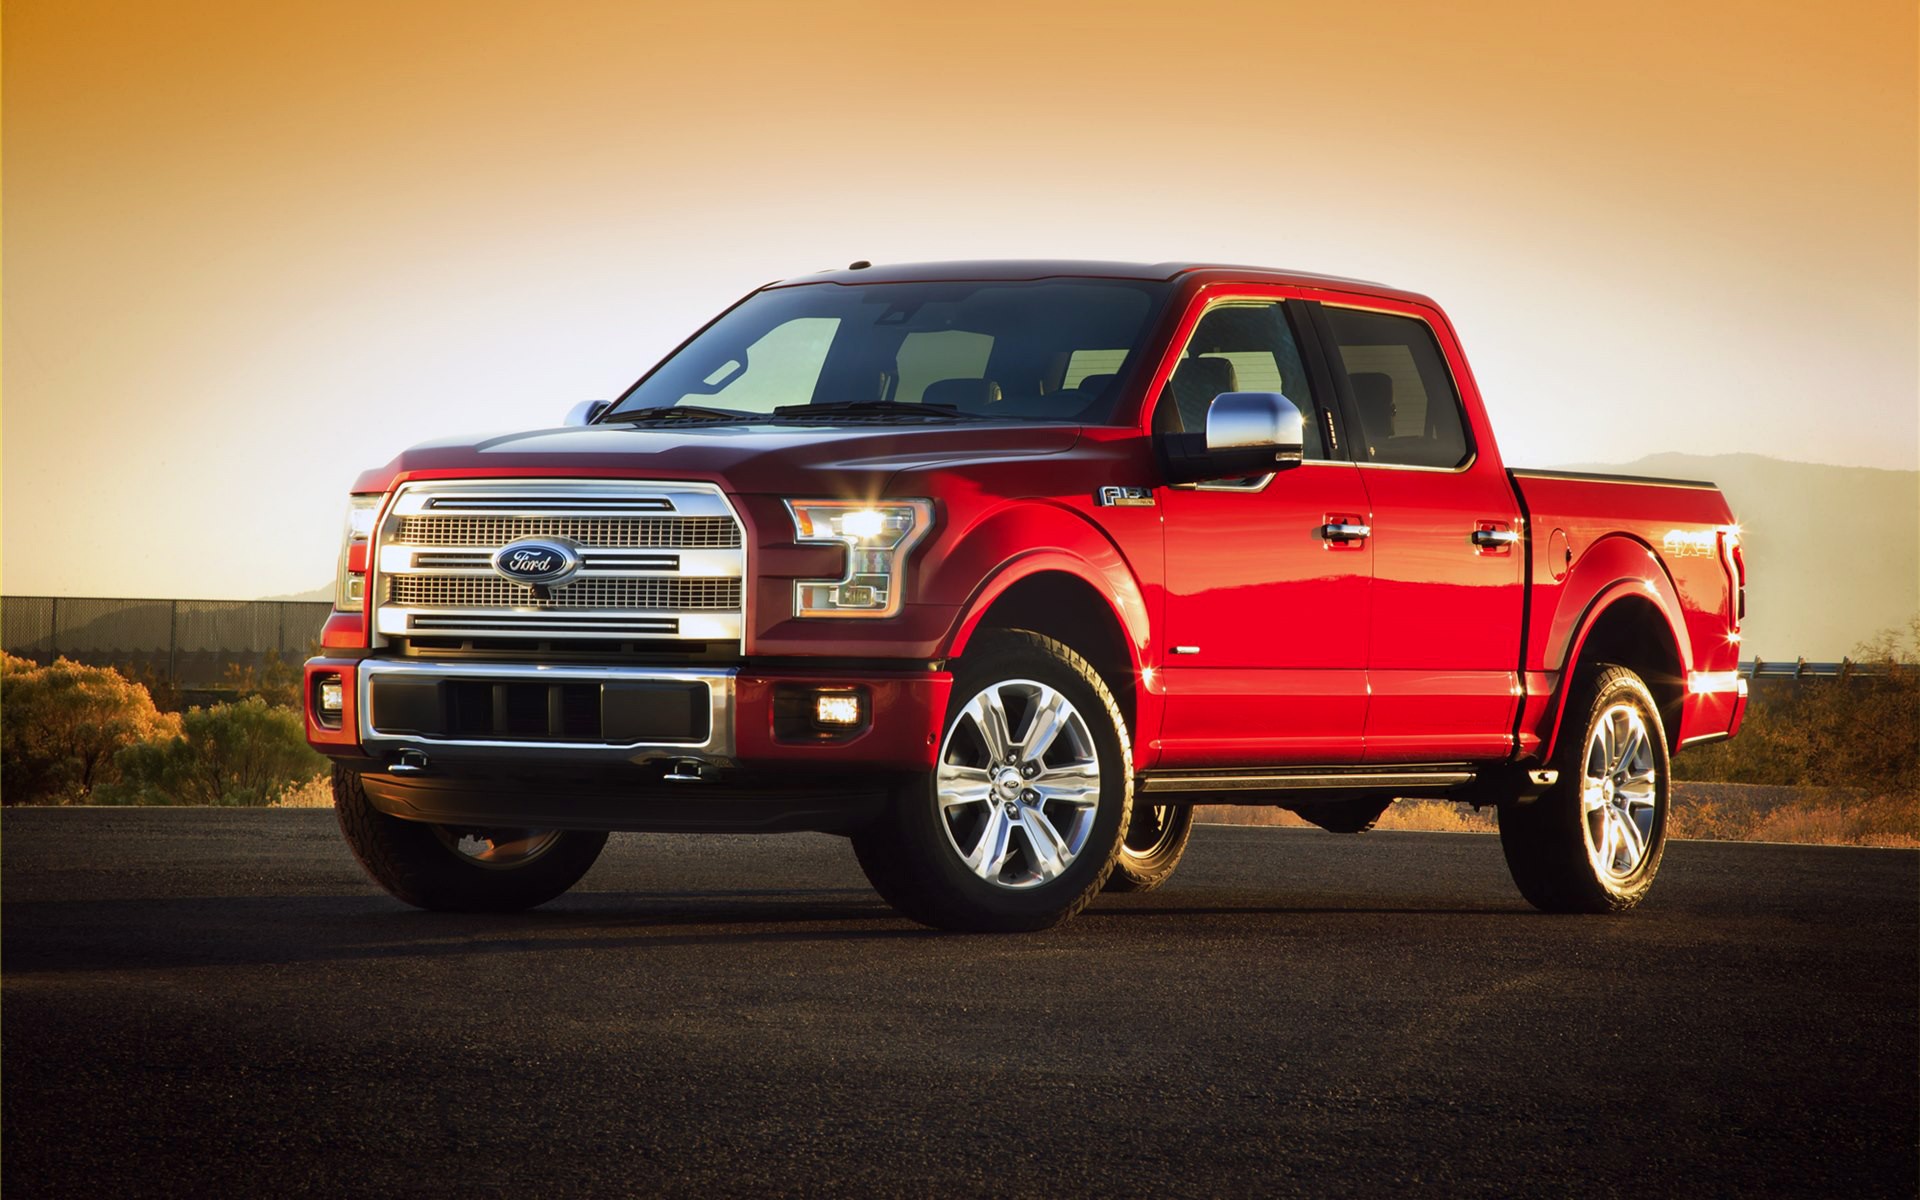 General 1920x1200 pickup trucks Ford car vehicle red cars American cars frontal view sunlight